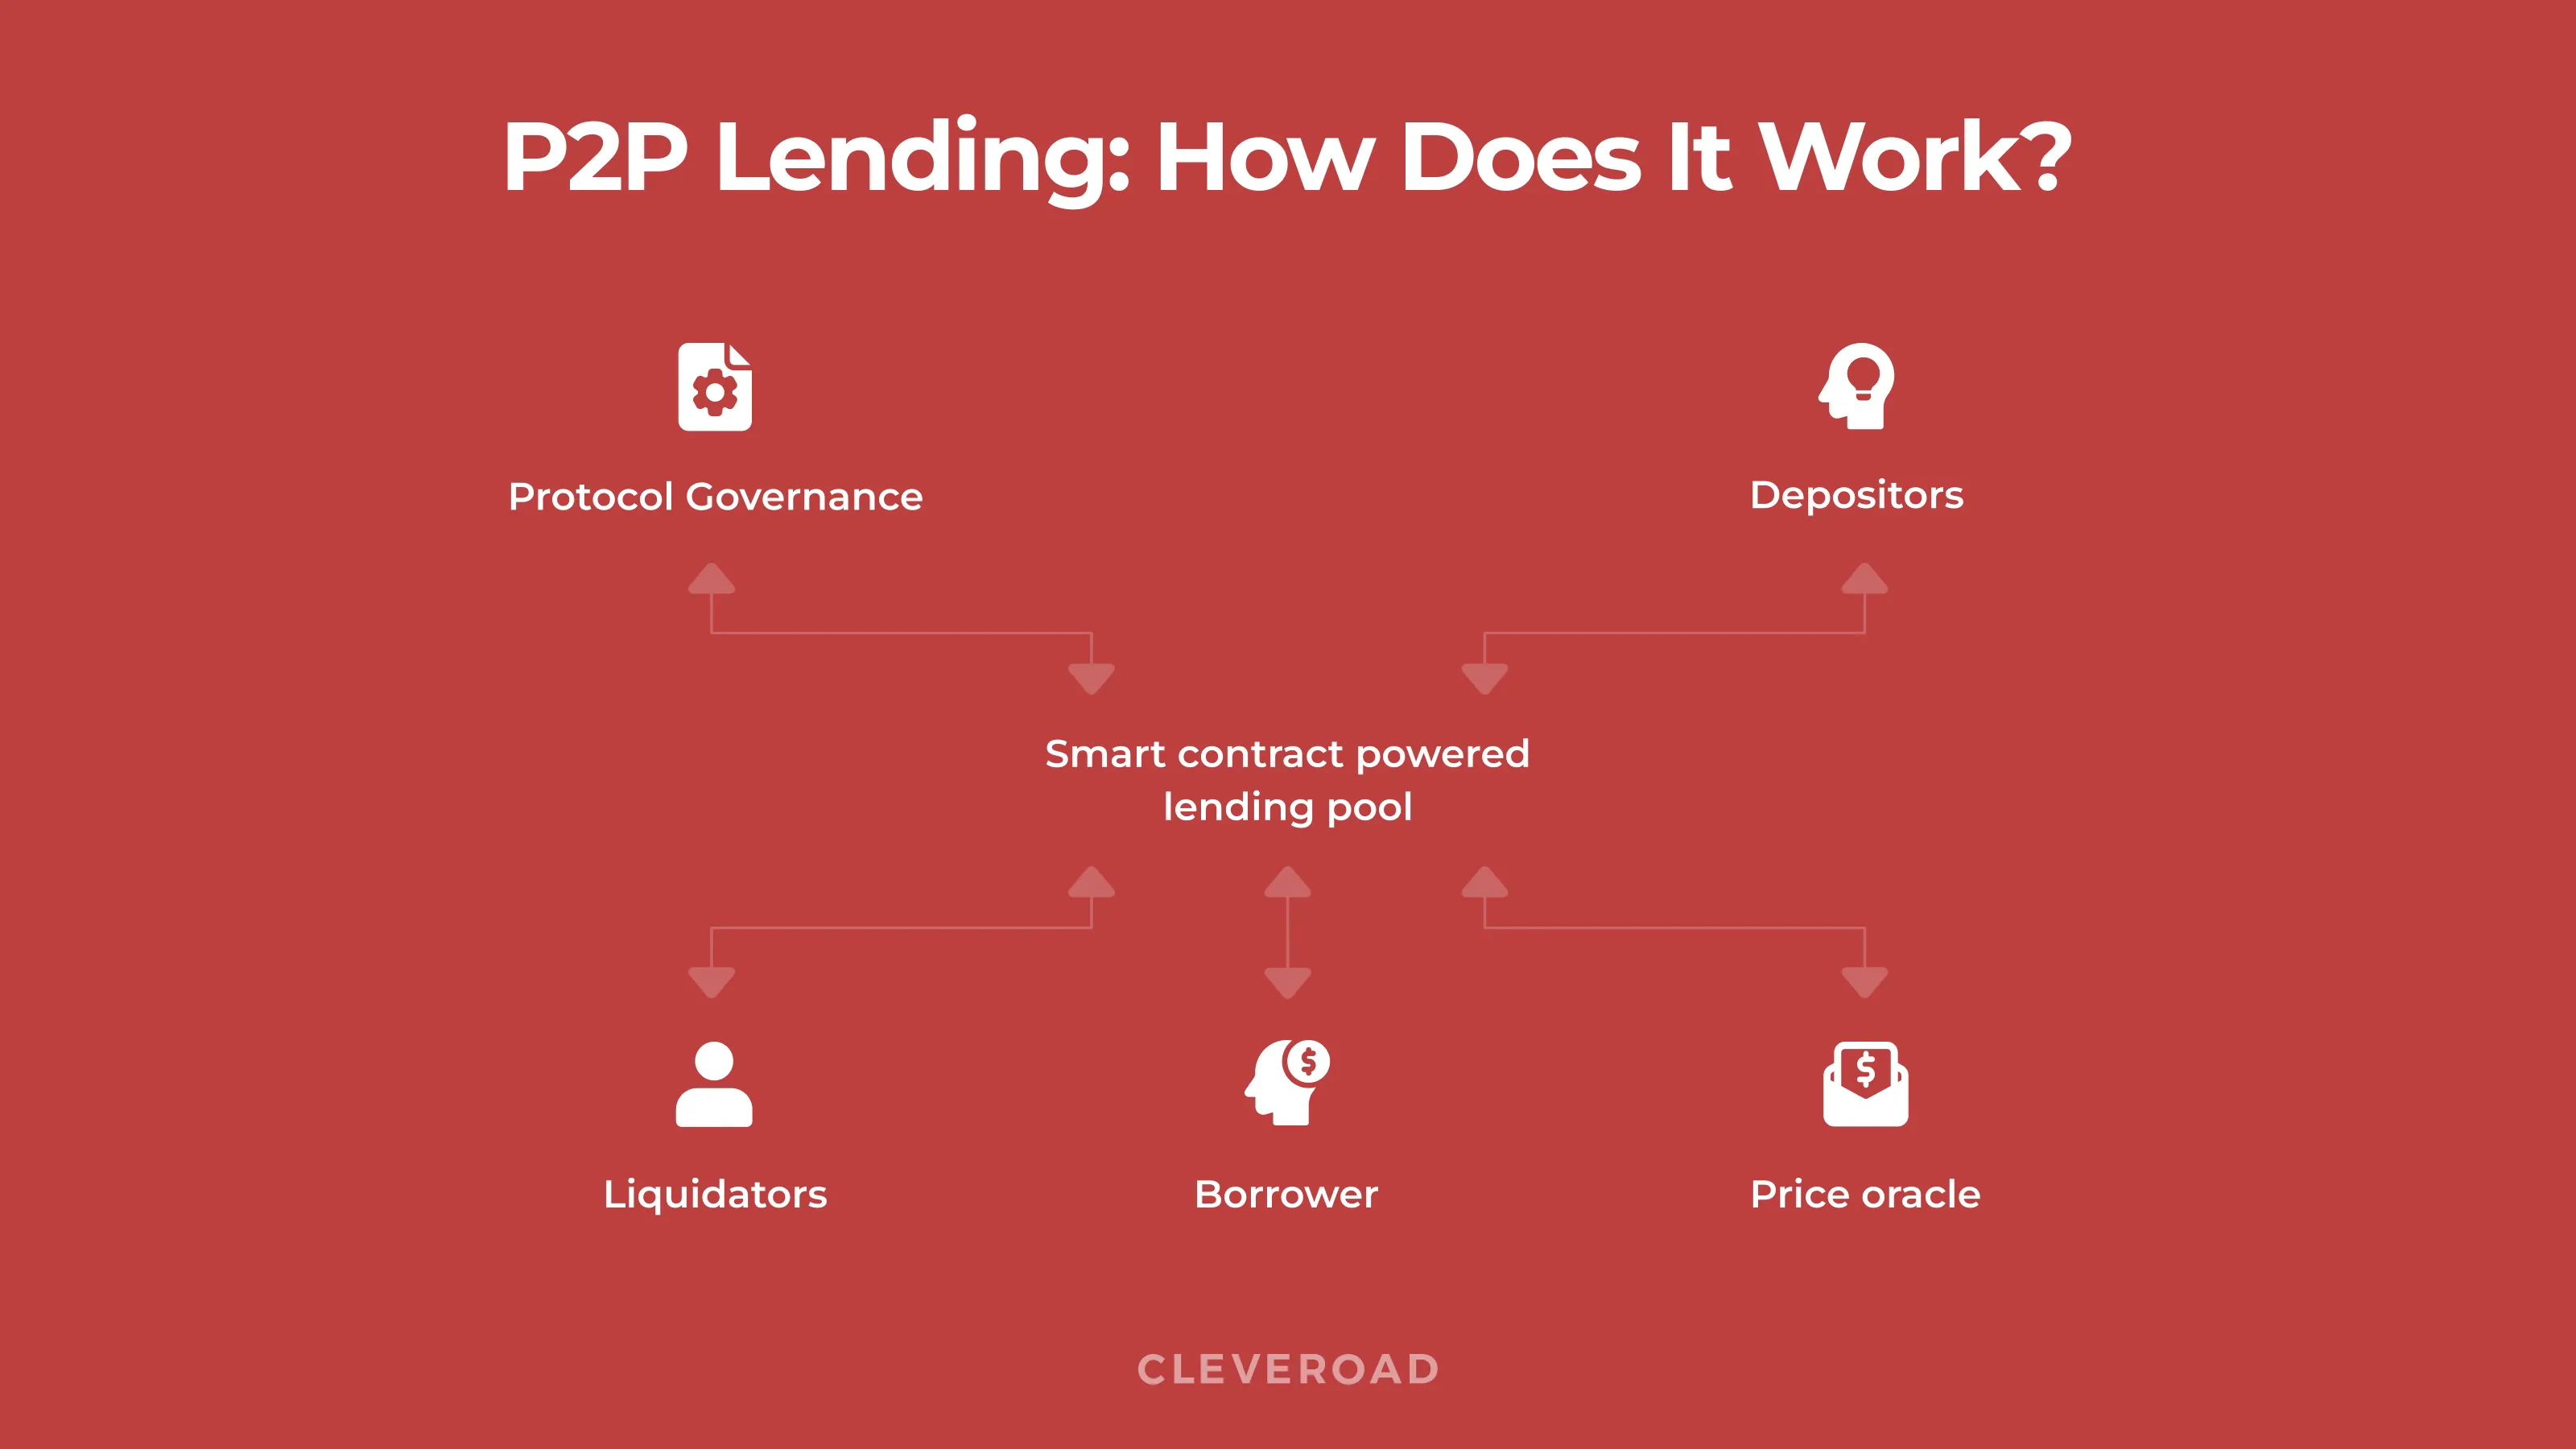 P2P lending: how does it work?